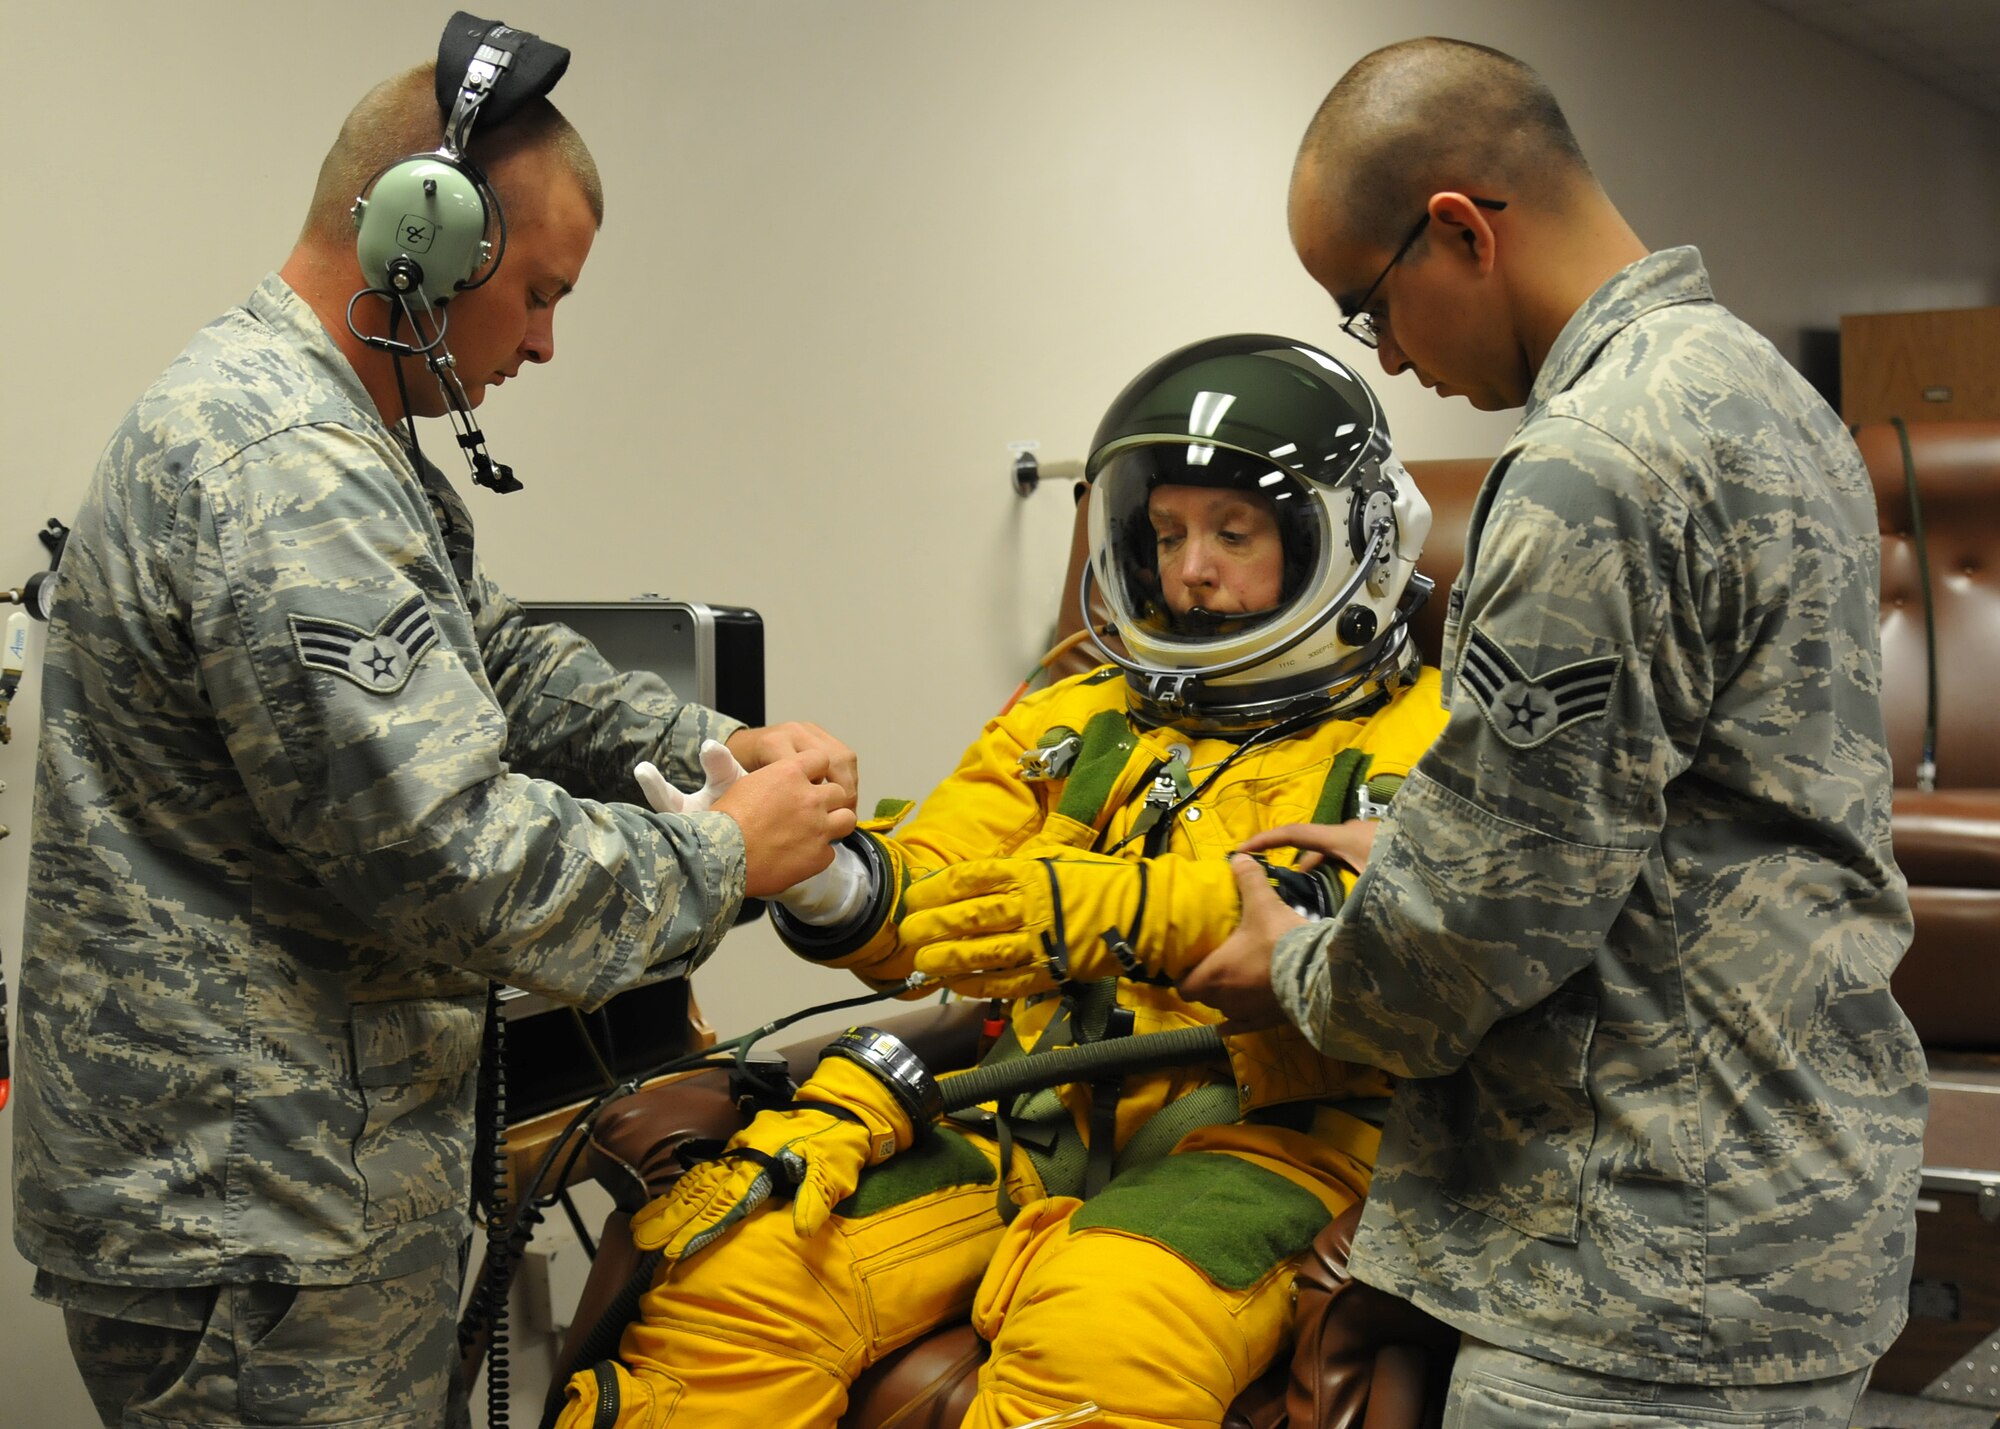 Senior Airmen Kyle Lang (right) and Aaron Saenz (left), 9th Physiological Support Squadron launch and recovery technicians, help Secretary of the Air Force Deborah Lee James properly dress in a high-altitude pressure suit at Beale Air Force Base, California, Aug. 11, 2015.  The specialized pressure suit allows U-2 Dragon Lady pilots to safely fly at altitudes reaching 70,000 feet. James visited Beale to receive a first-hand perspective of high-altitude intelligence, surveillance and reconnaissance from collection to dissemination. (U.S. Air Force photo by Senior Airman Dana J. Cable)